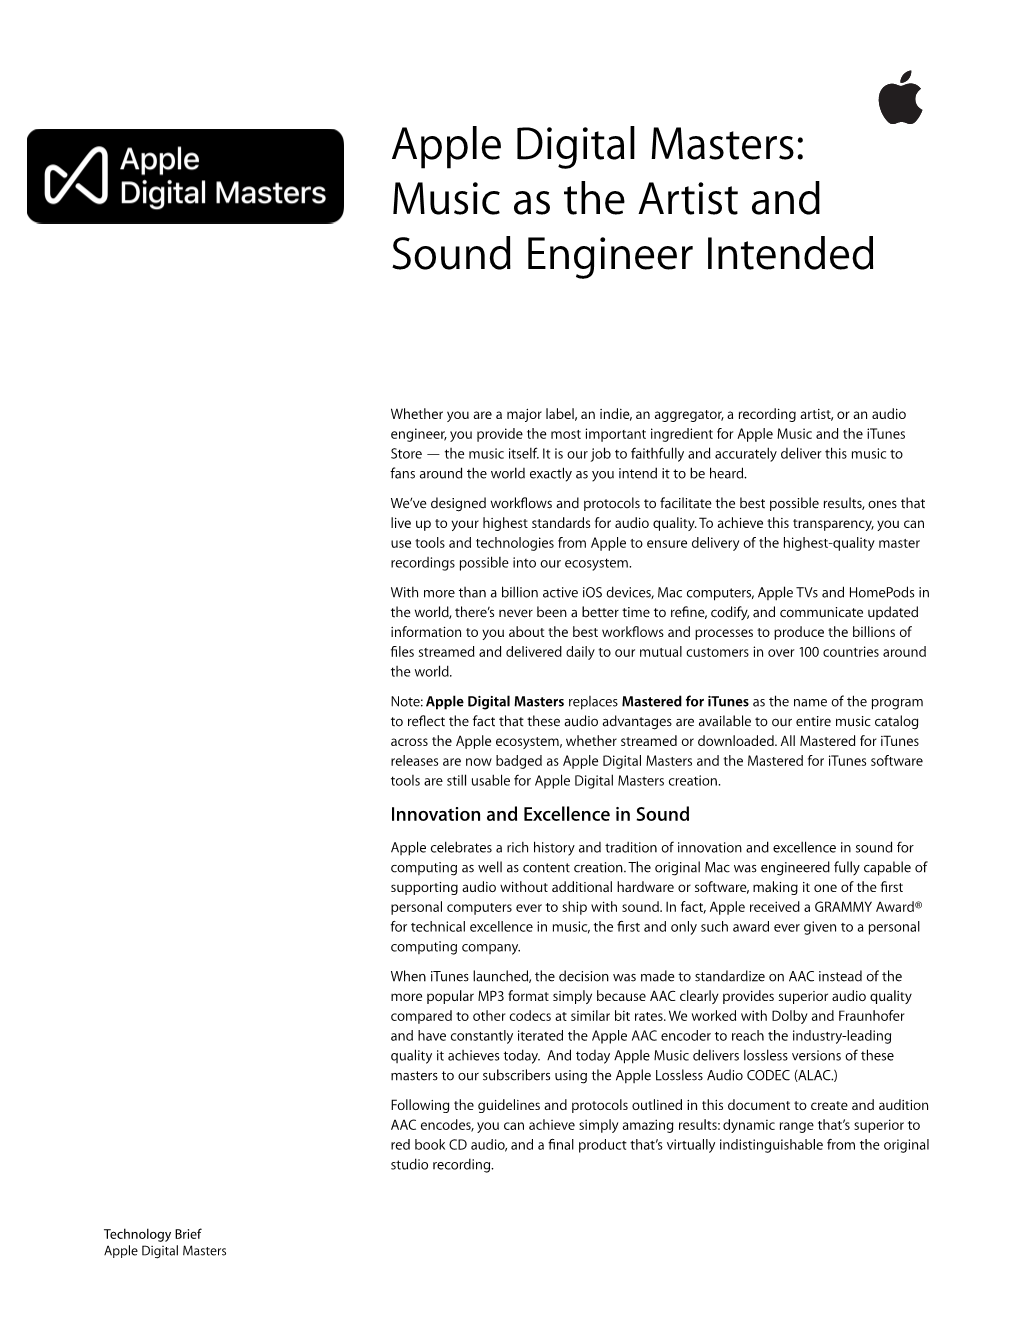 Apple Digital Masters: Music As the Artist and Sound Engineer Intended